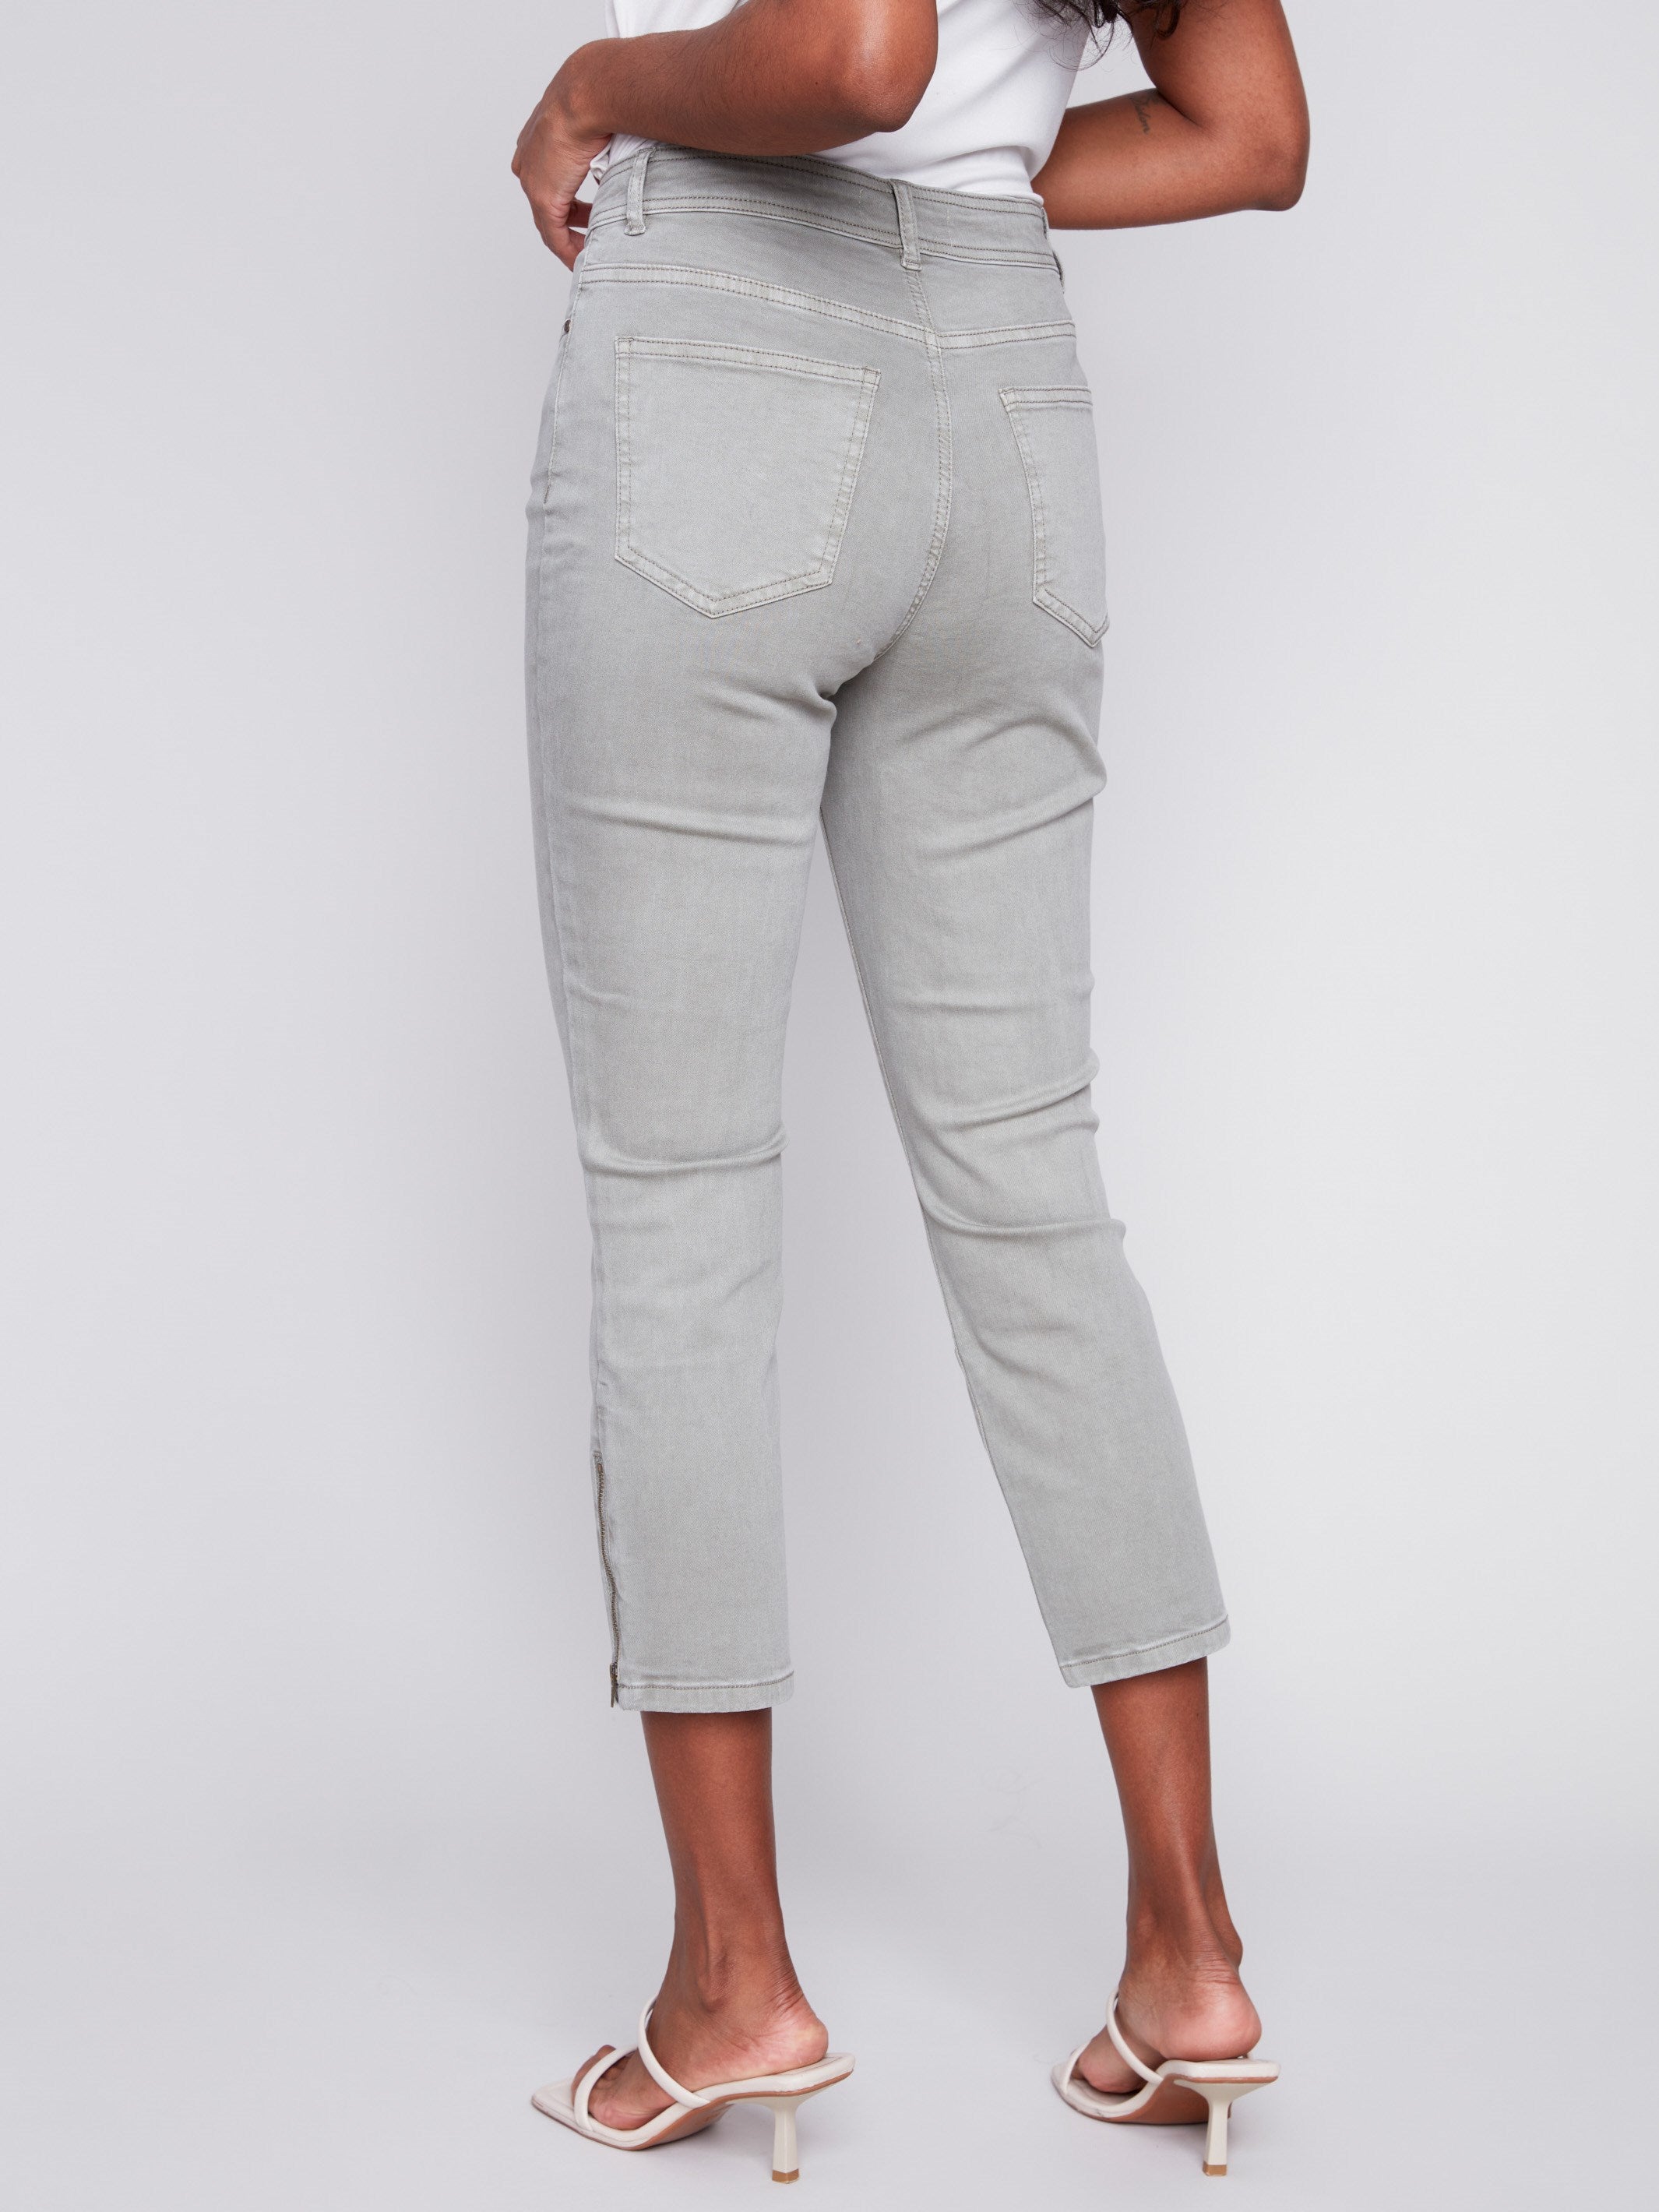 Charlie B Cropped Twill Pants with Zipper Detail - Celadon - Image 4